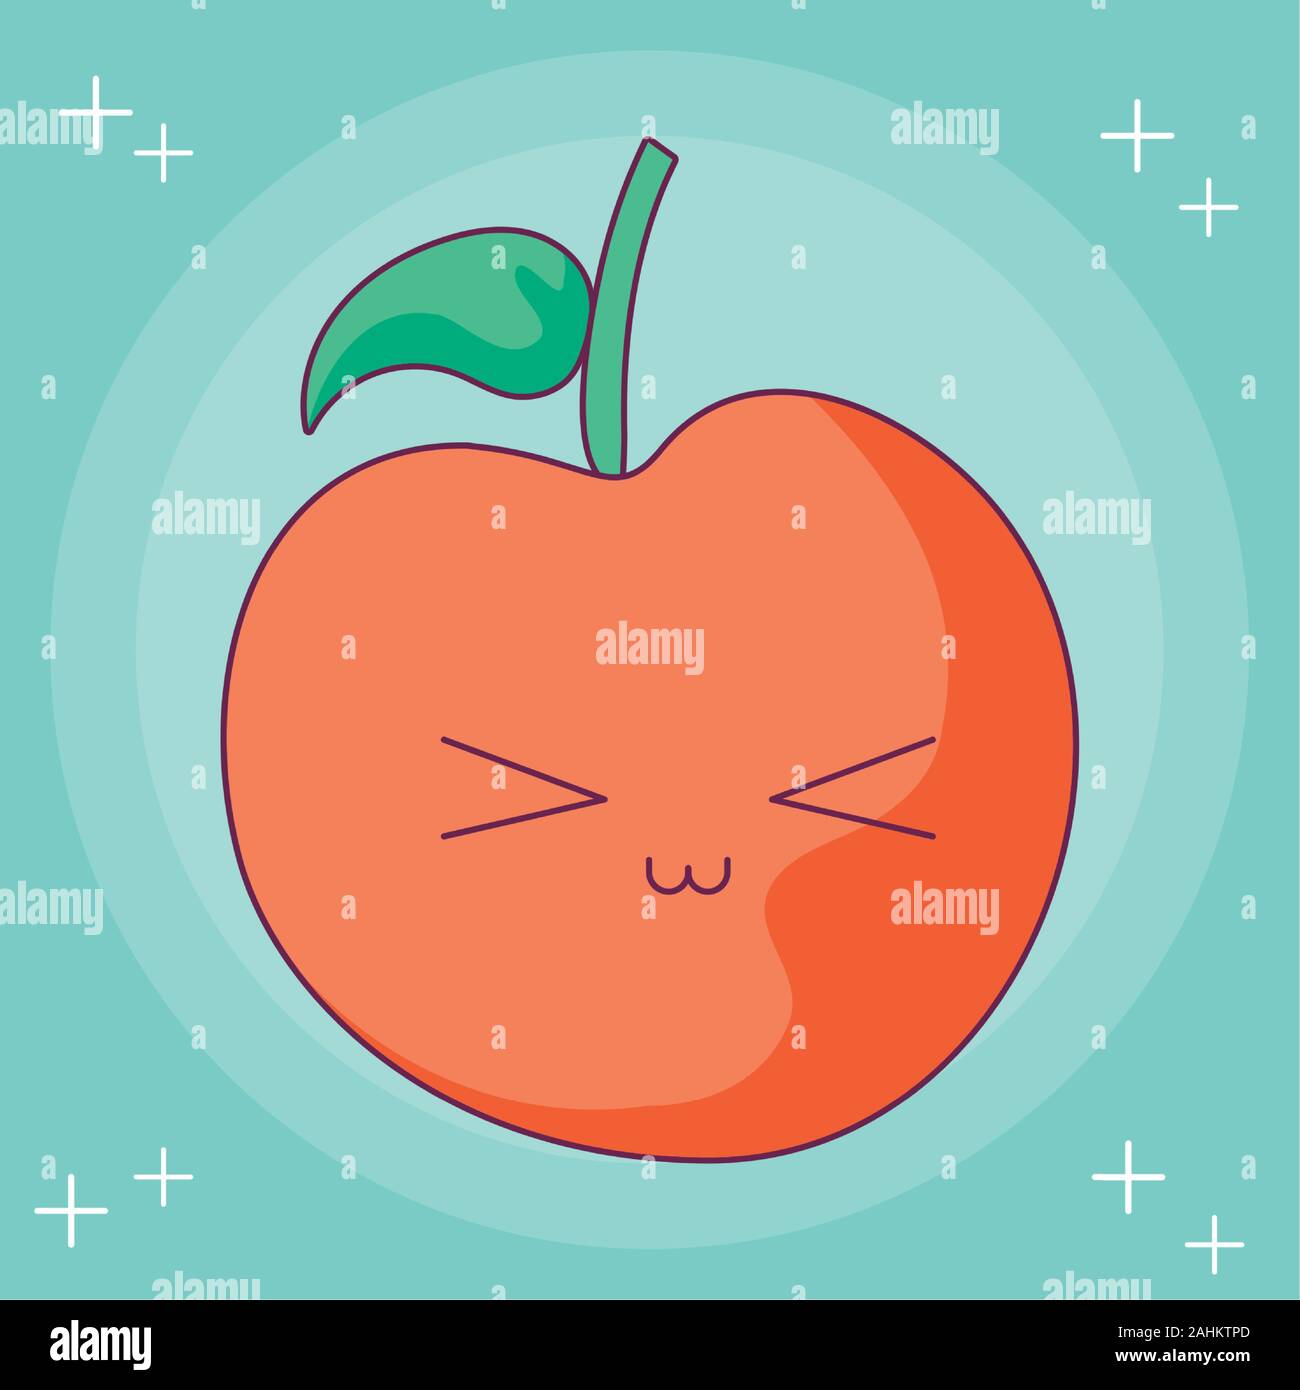 apple cartoon design, Kawaii expression cute character funny and emoticon theme Vector illustration Stock Vector